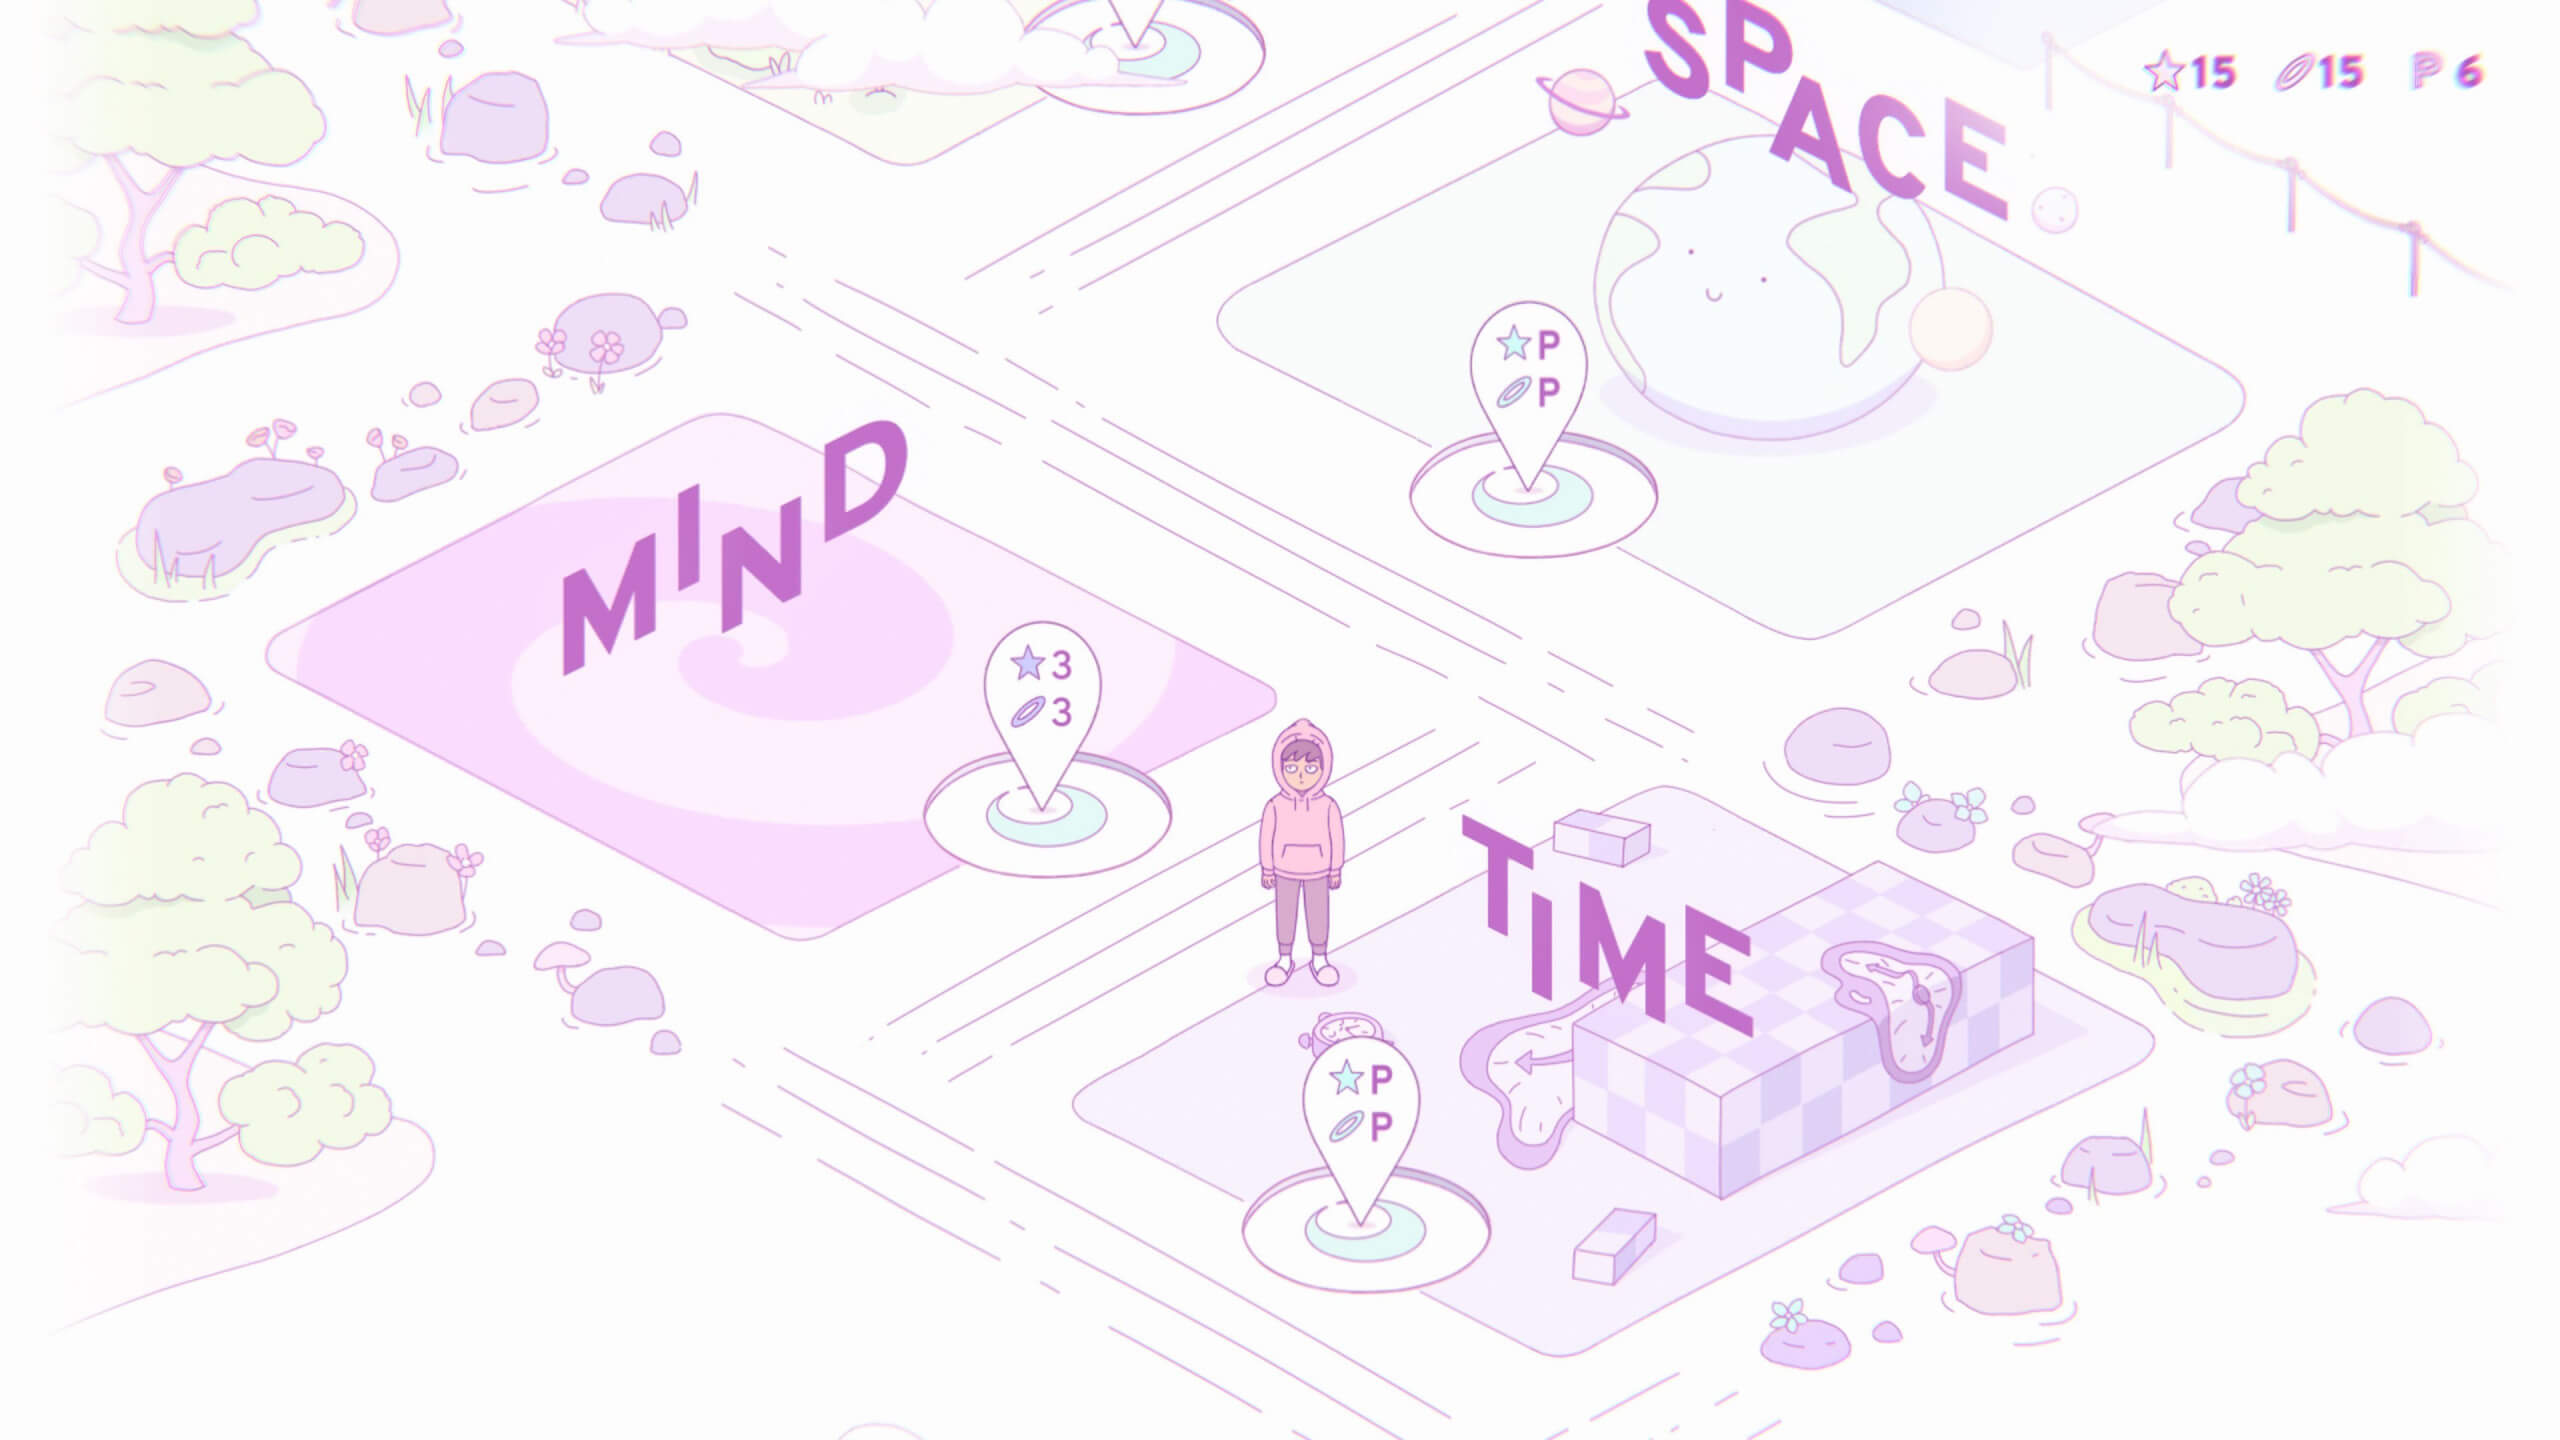 The main character stood centred in a hub world surrounded by different level choices like 'mind' 'time' and 'space'